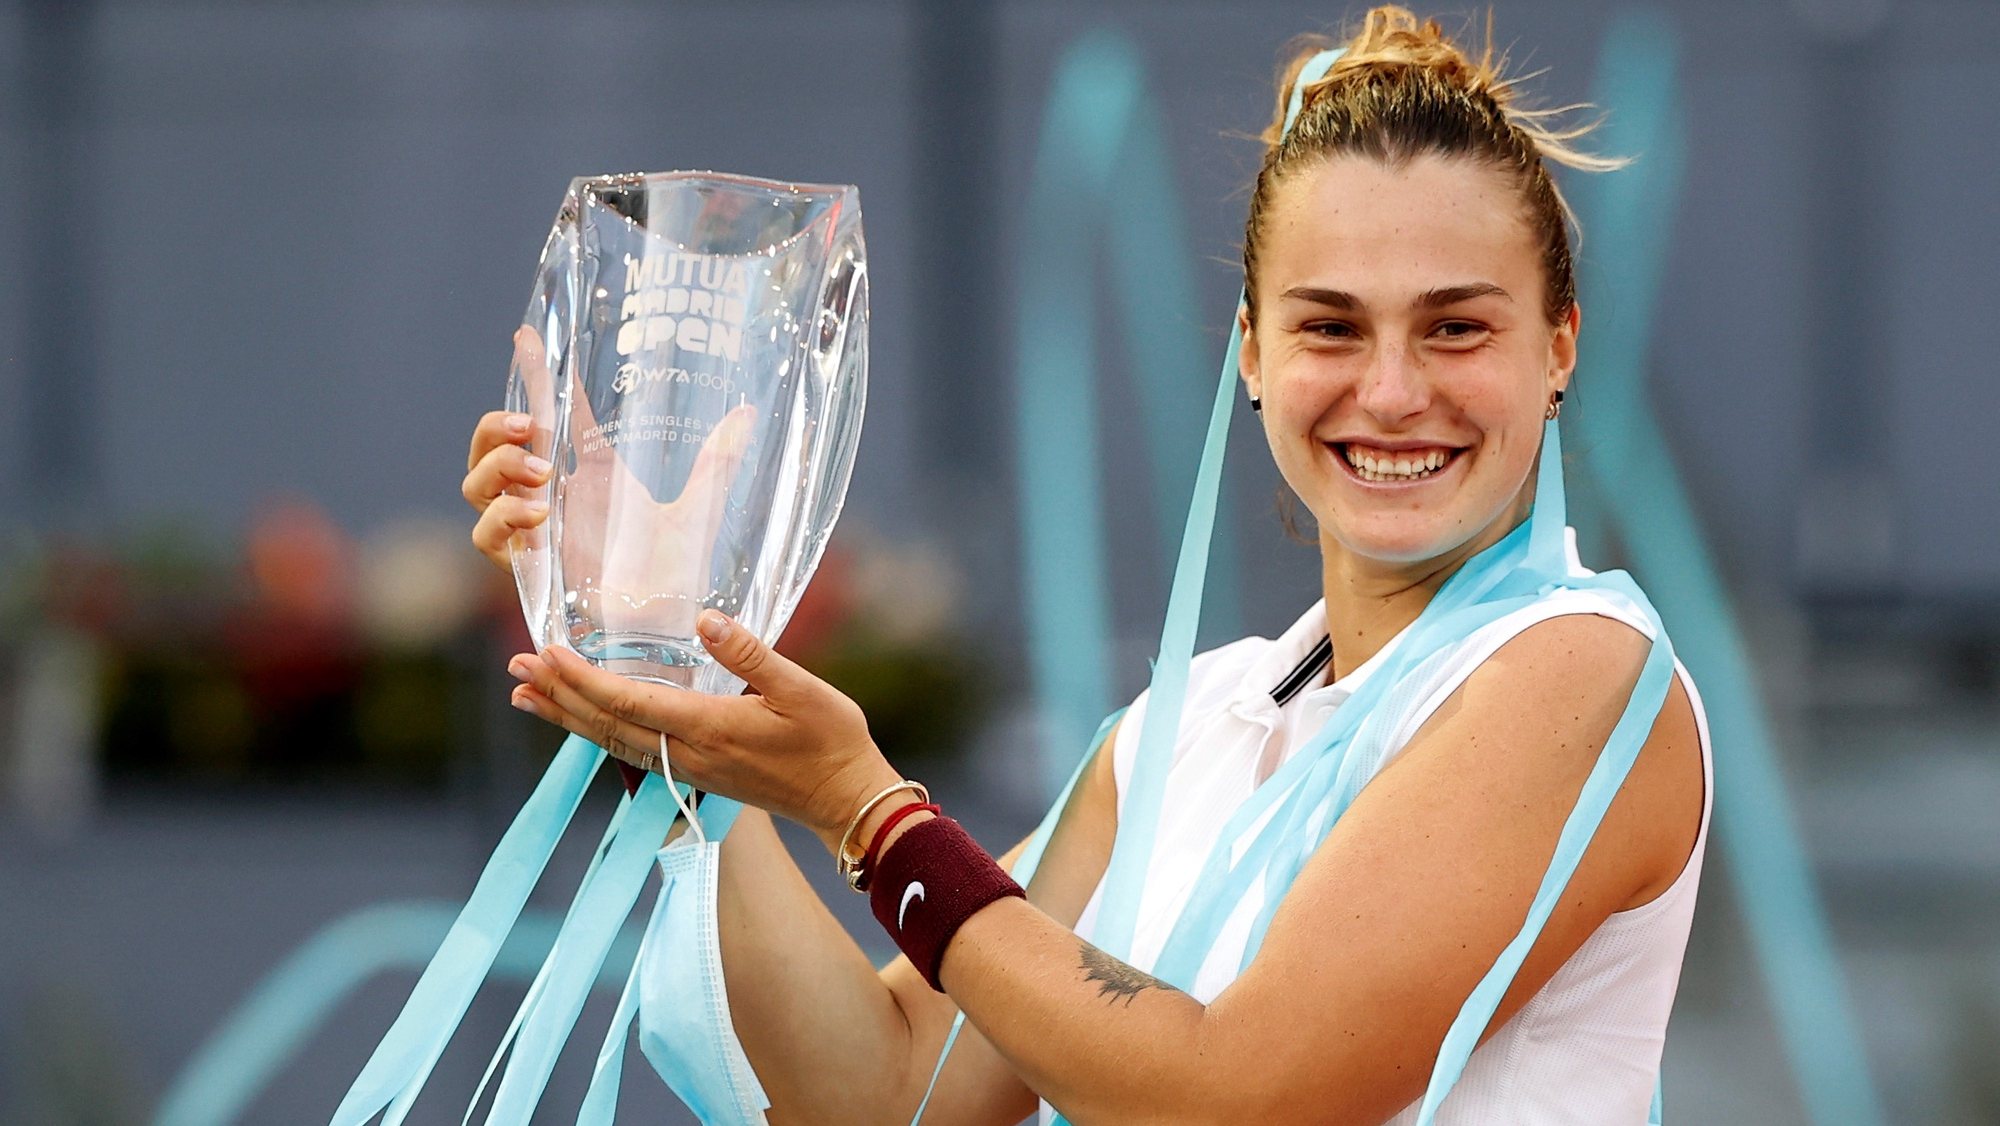 epa09186293 Aryna Sabalenka of Belarus celebrates with her trophy after winning against Ashleigh Barty of Australia in their final match at the Mutua Madrid Open tennis tournament in Madrid, Spain, 08 May 2021.  EPA/CHEMA MOYA